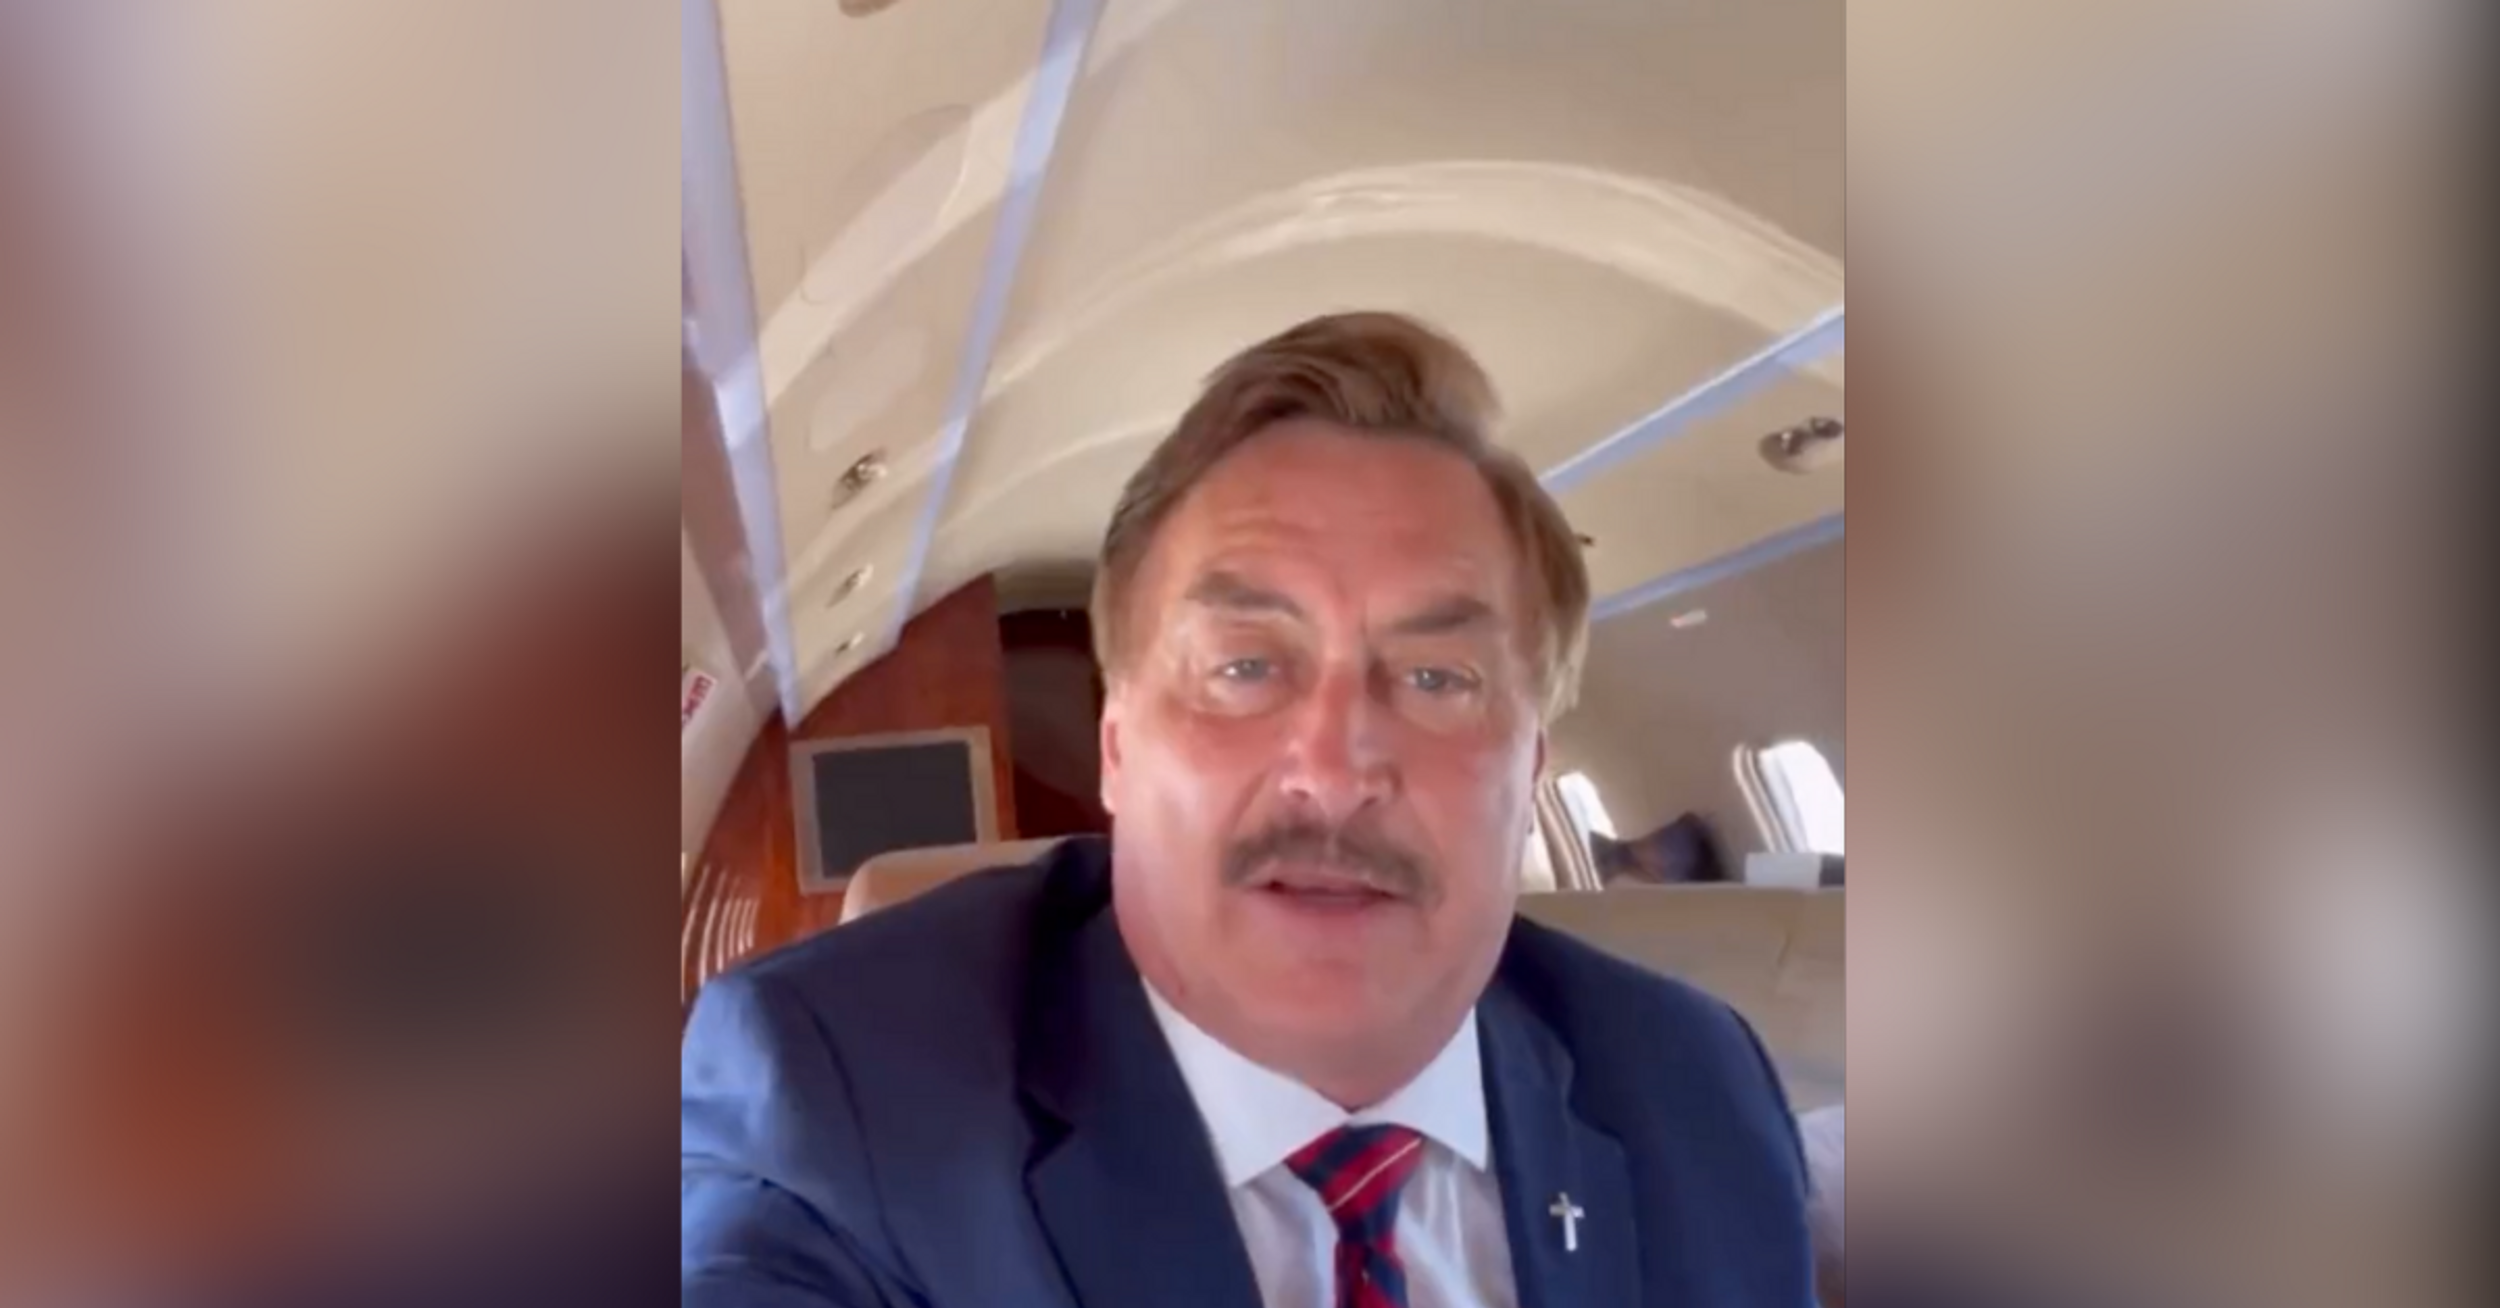 Mike Lindell Announces He's 'Back On Twitter' Only To Have New Account Immediately Suspended